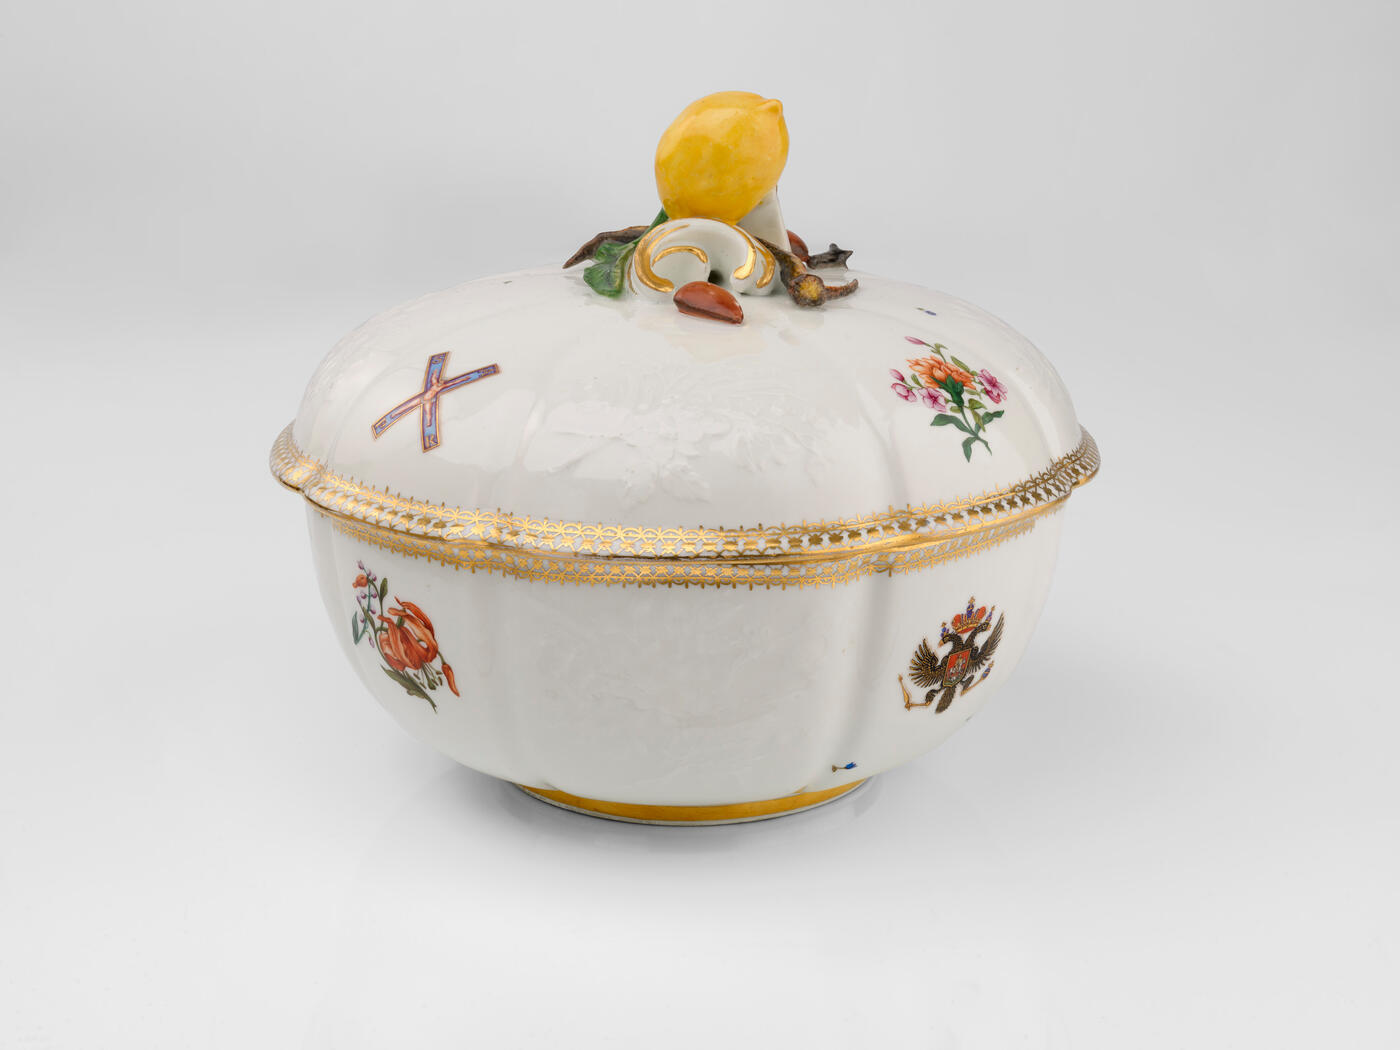 A Rare and Important Soup Tureen from the St Andrew Service